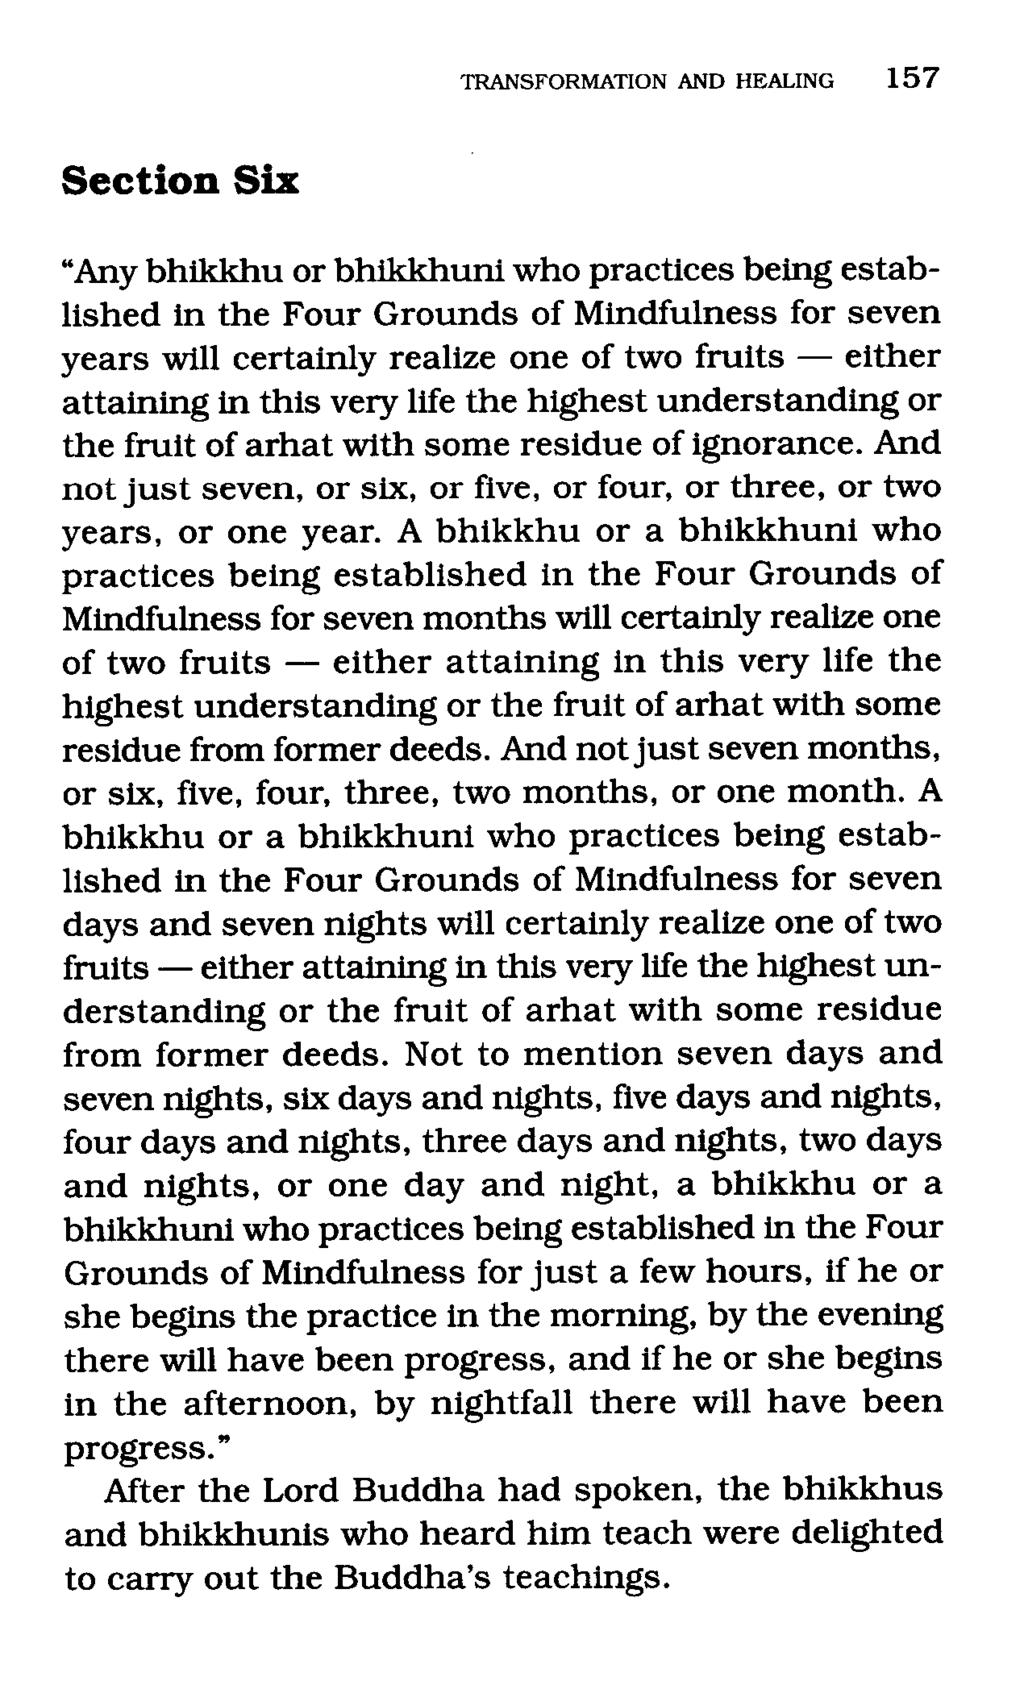 Section Six "Any bhikkhu or bhikkhuni who practices being established in the Four Grounds of Mindfulness for seven years will certainly realize one of two fruits - either attaining in this very life